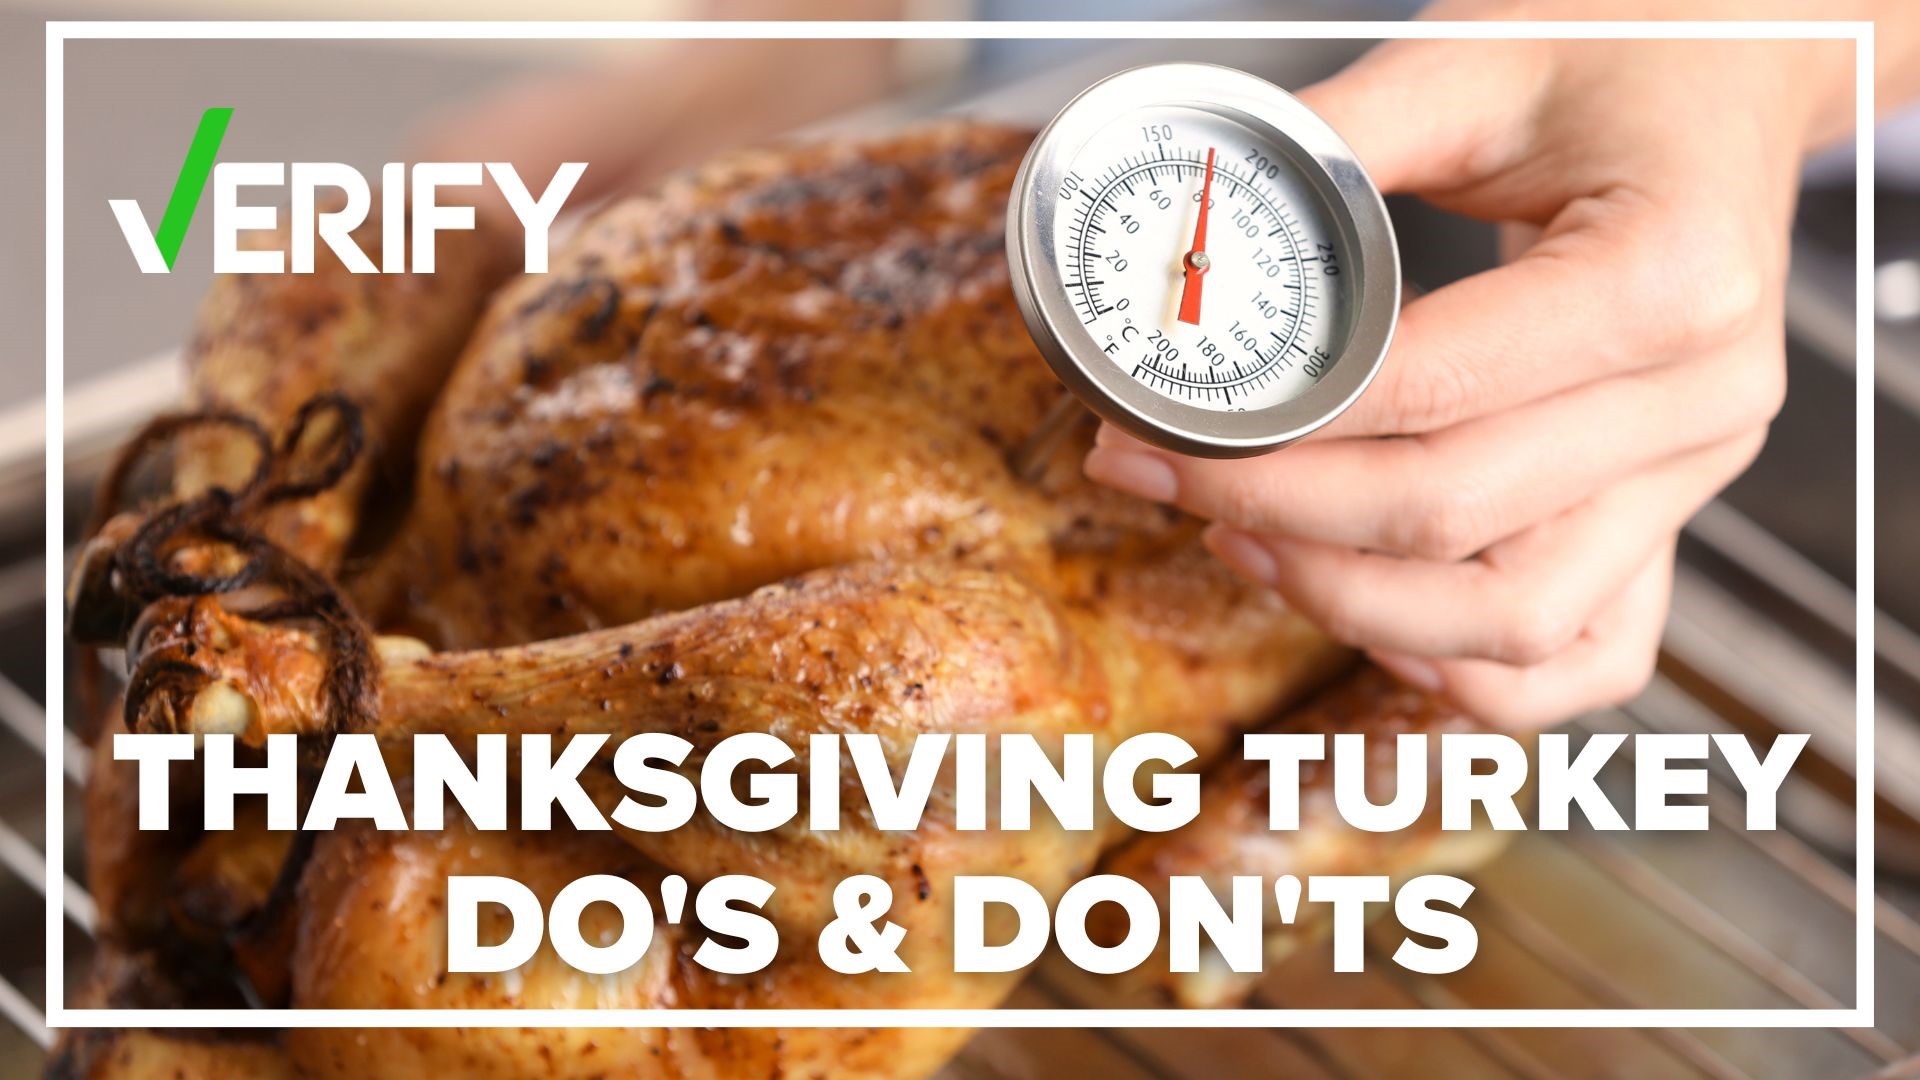 If you haven't already, it's time to get started with your Thanksgiving turkey preparations. Here are some basic do's & don'ts for the centerpiece of your feast.